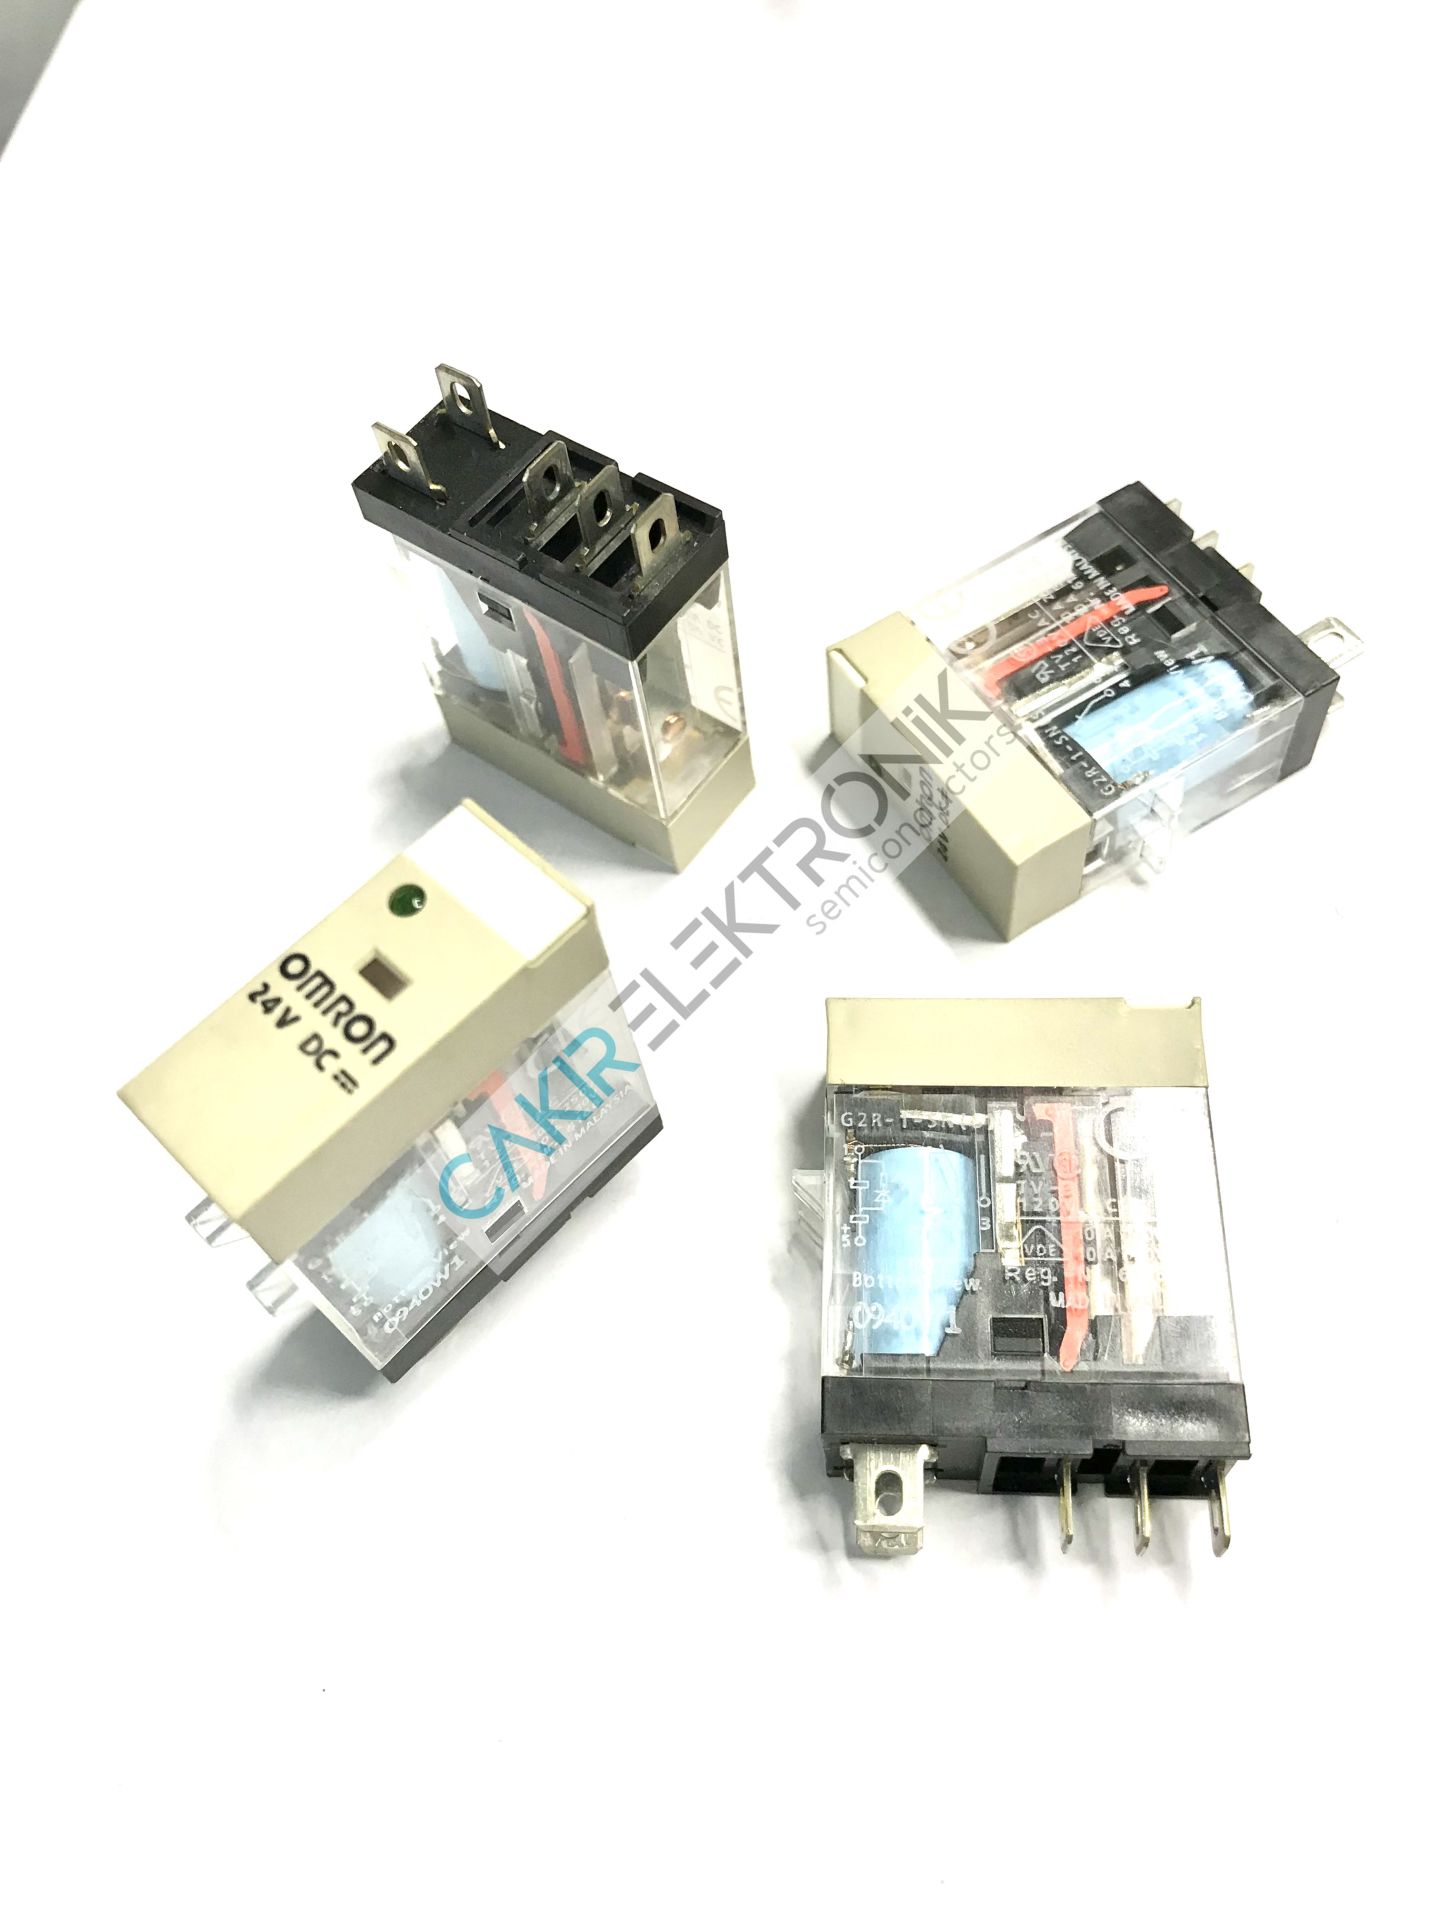 G2R-1-SN (S) 24V DC - G2R-1-SN 24V DC - G2R-1-SN-DC24(S) - Relay, plug-in, 5-pin, SPDT, 10 A mech & LED indicators, label facility